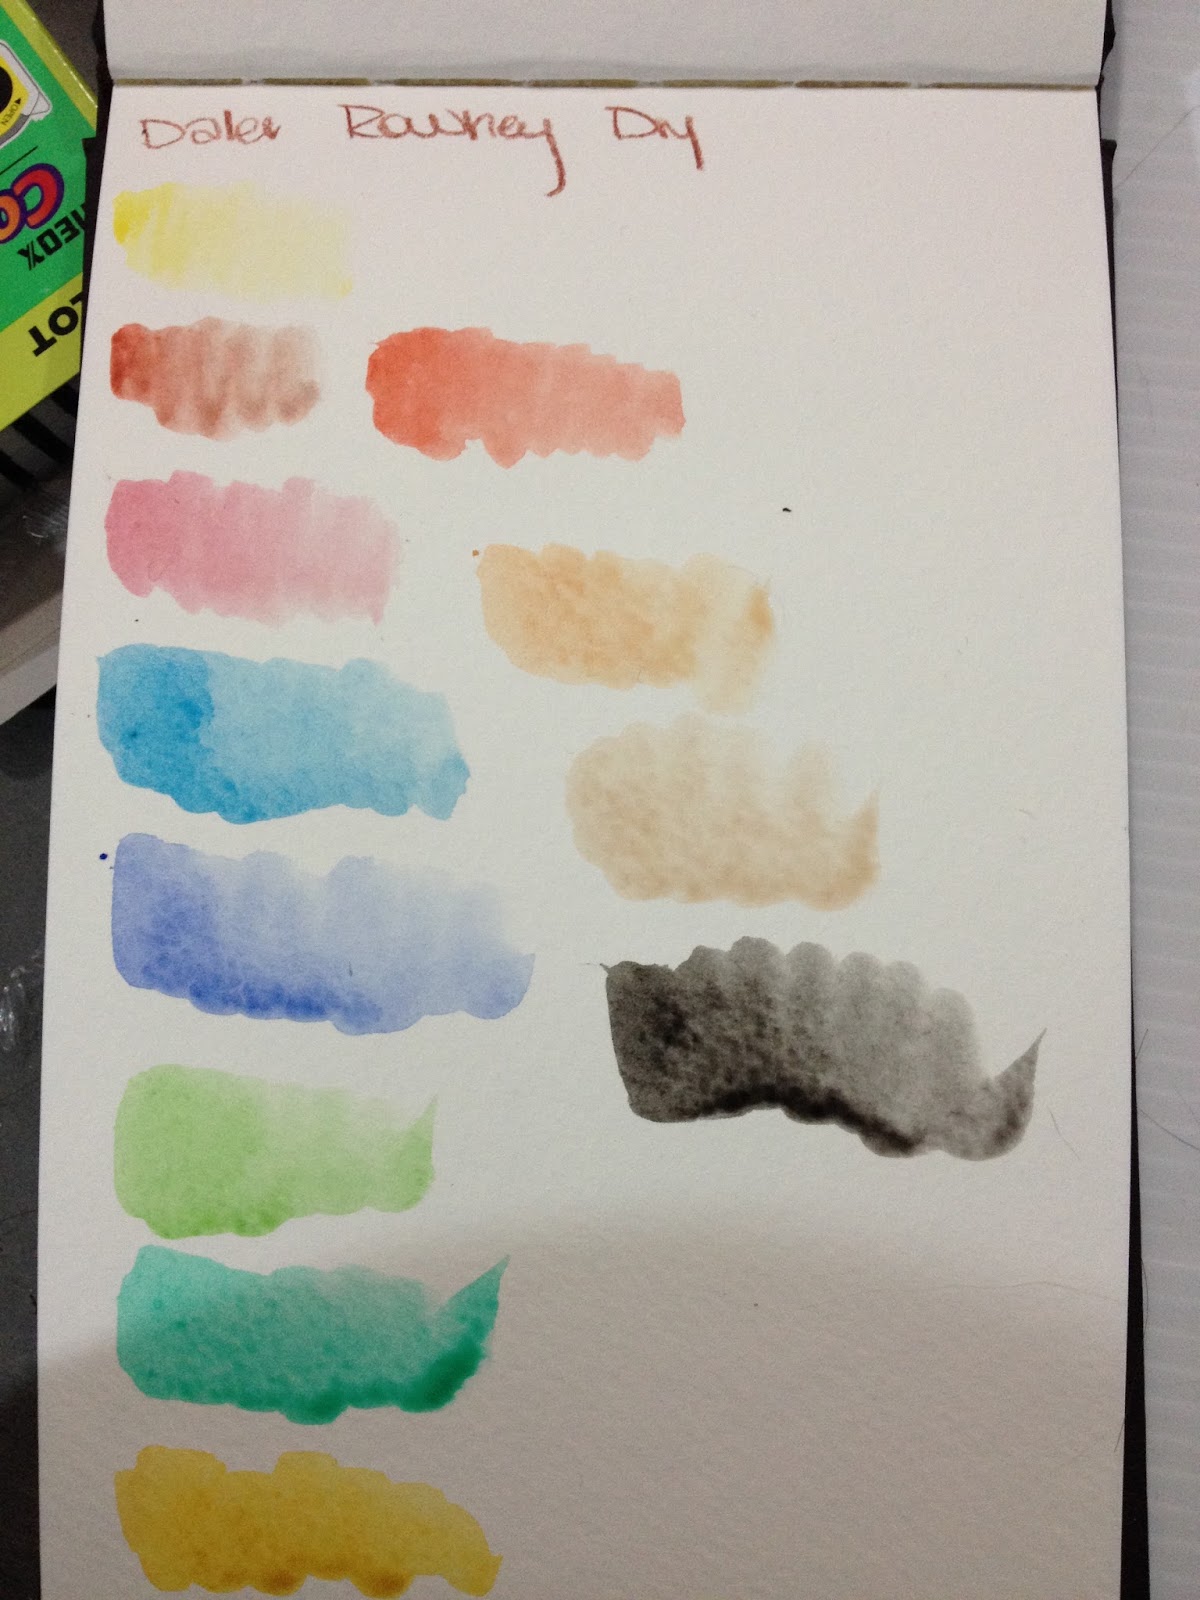 Daler Rowney Aquafine Watercolor Pans Inks and Tube Paint Review